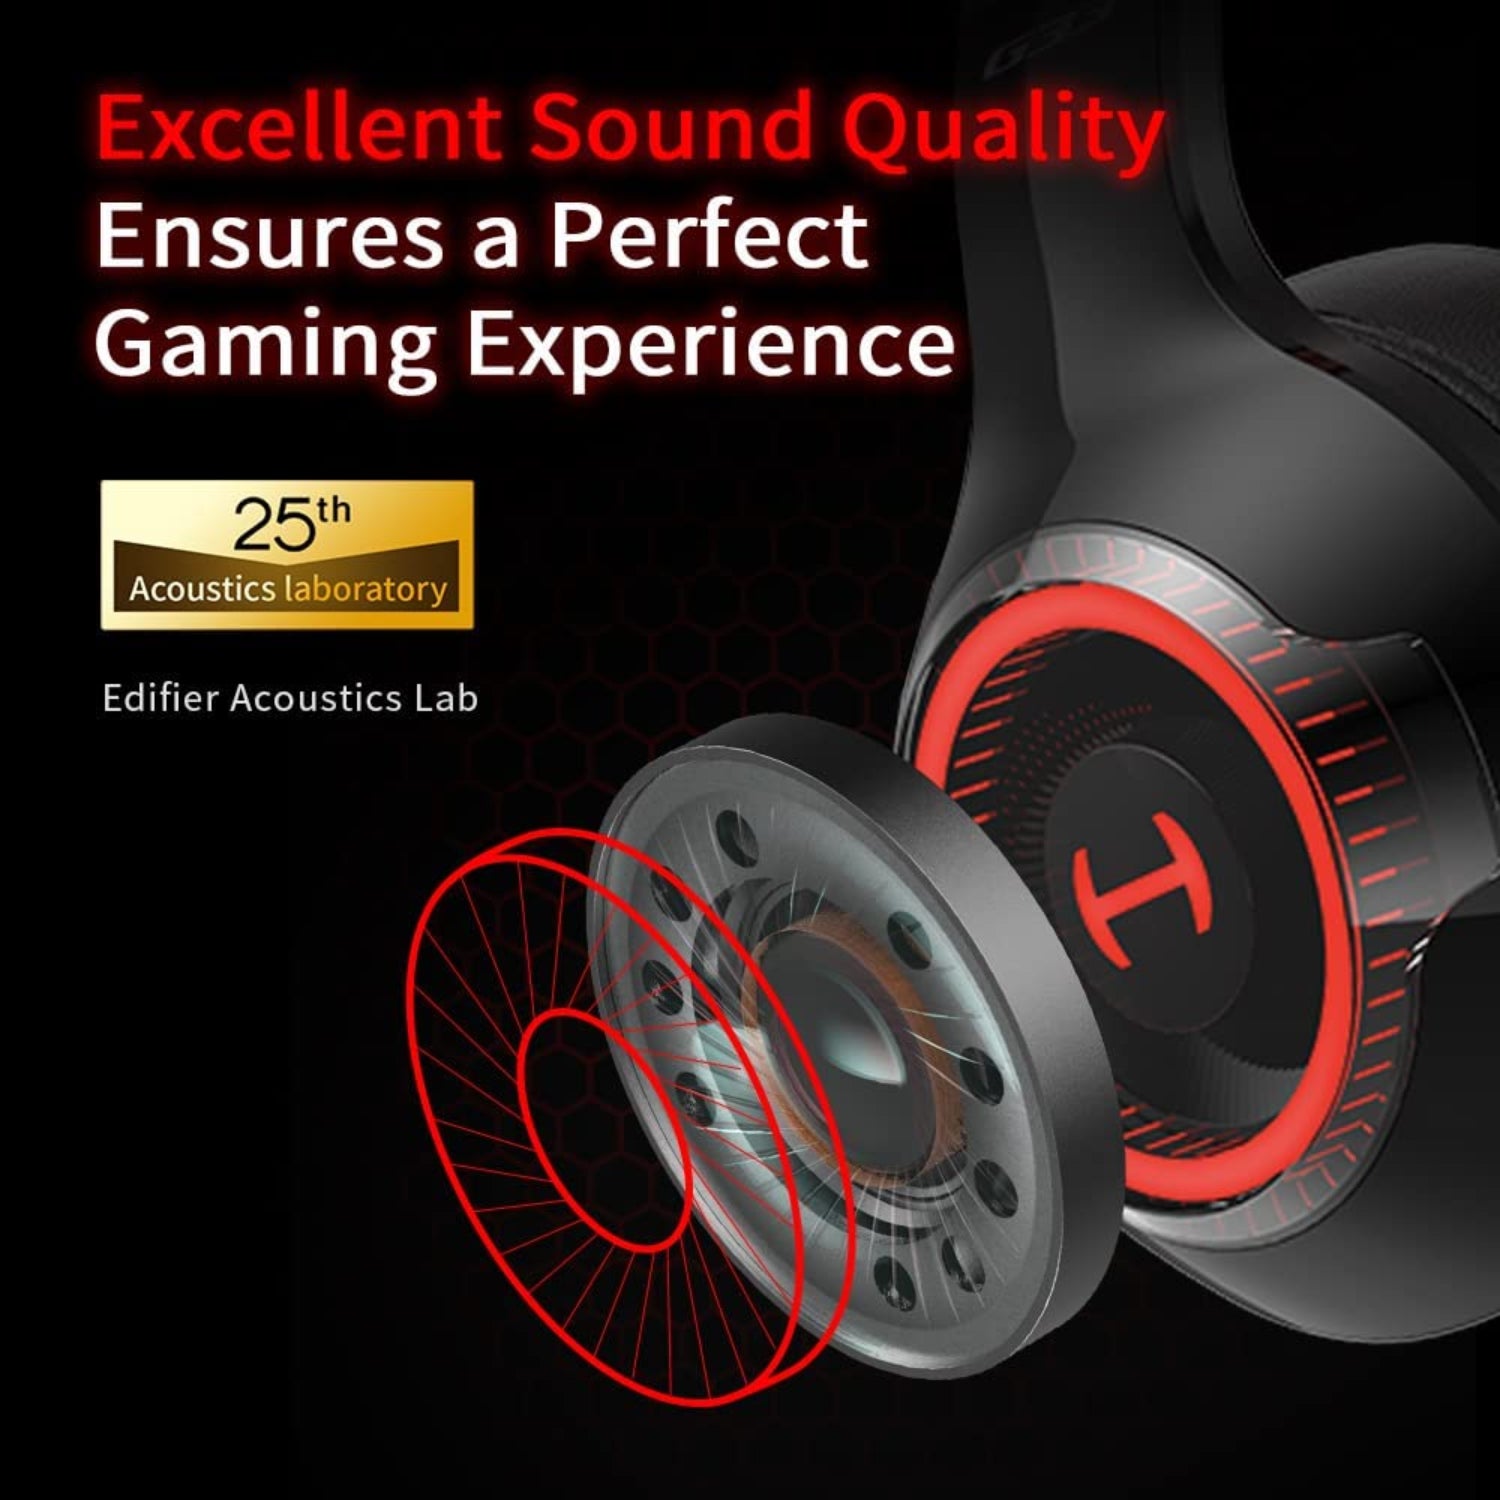 G33 Gaming Headset with Microphone